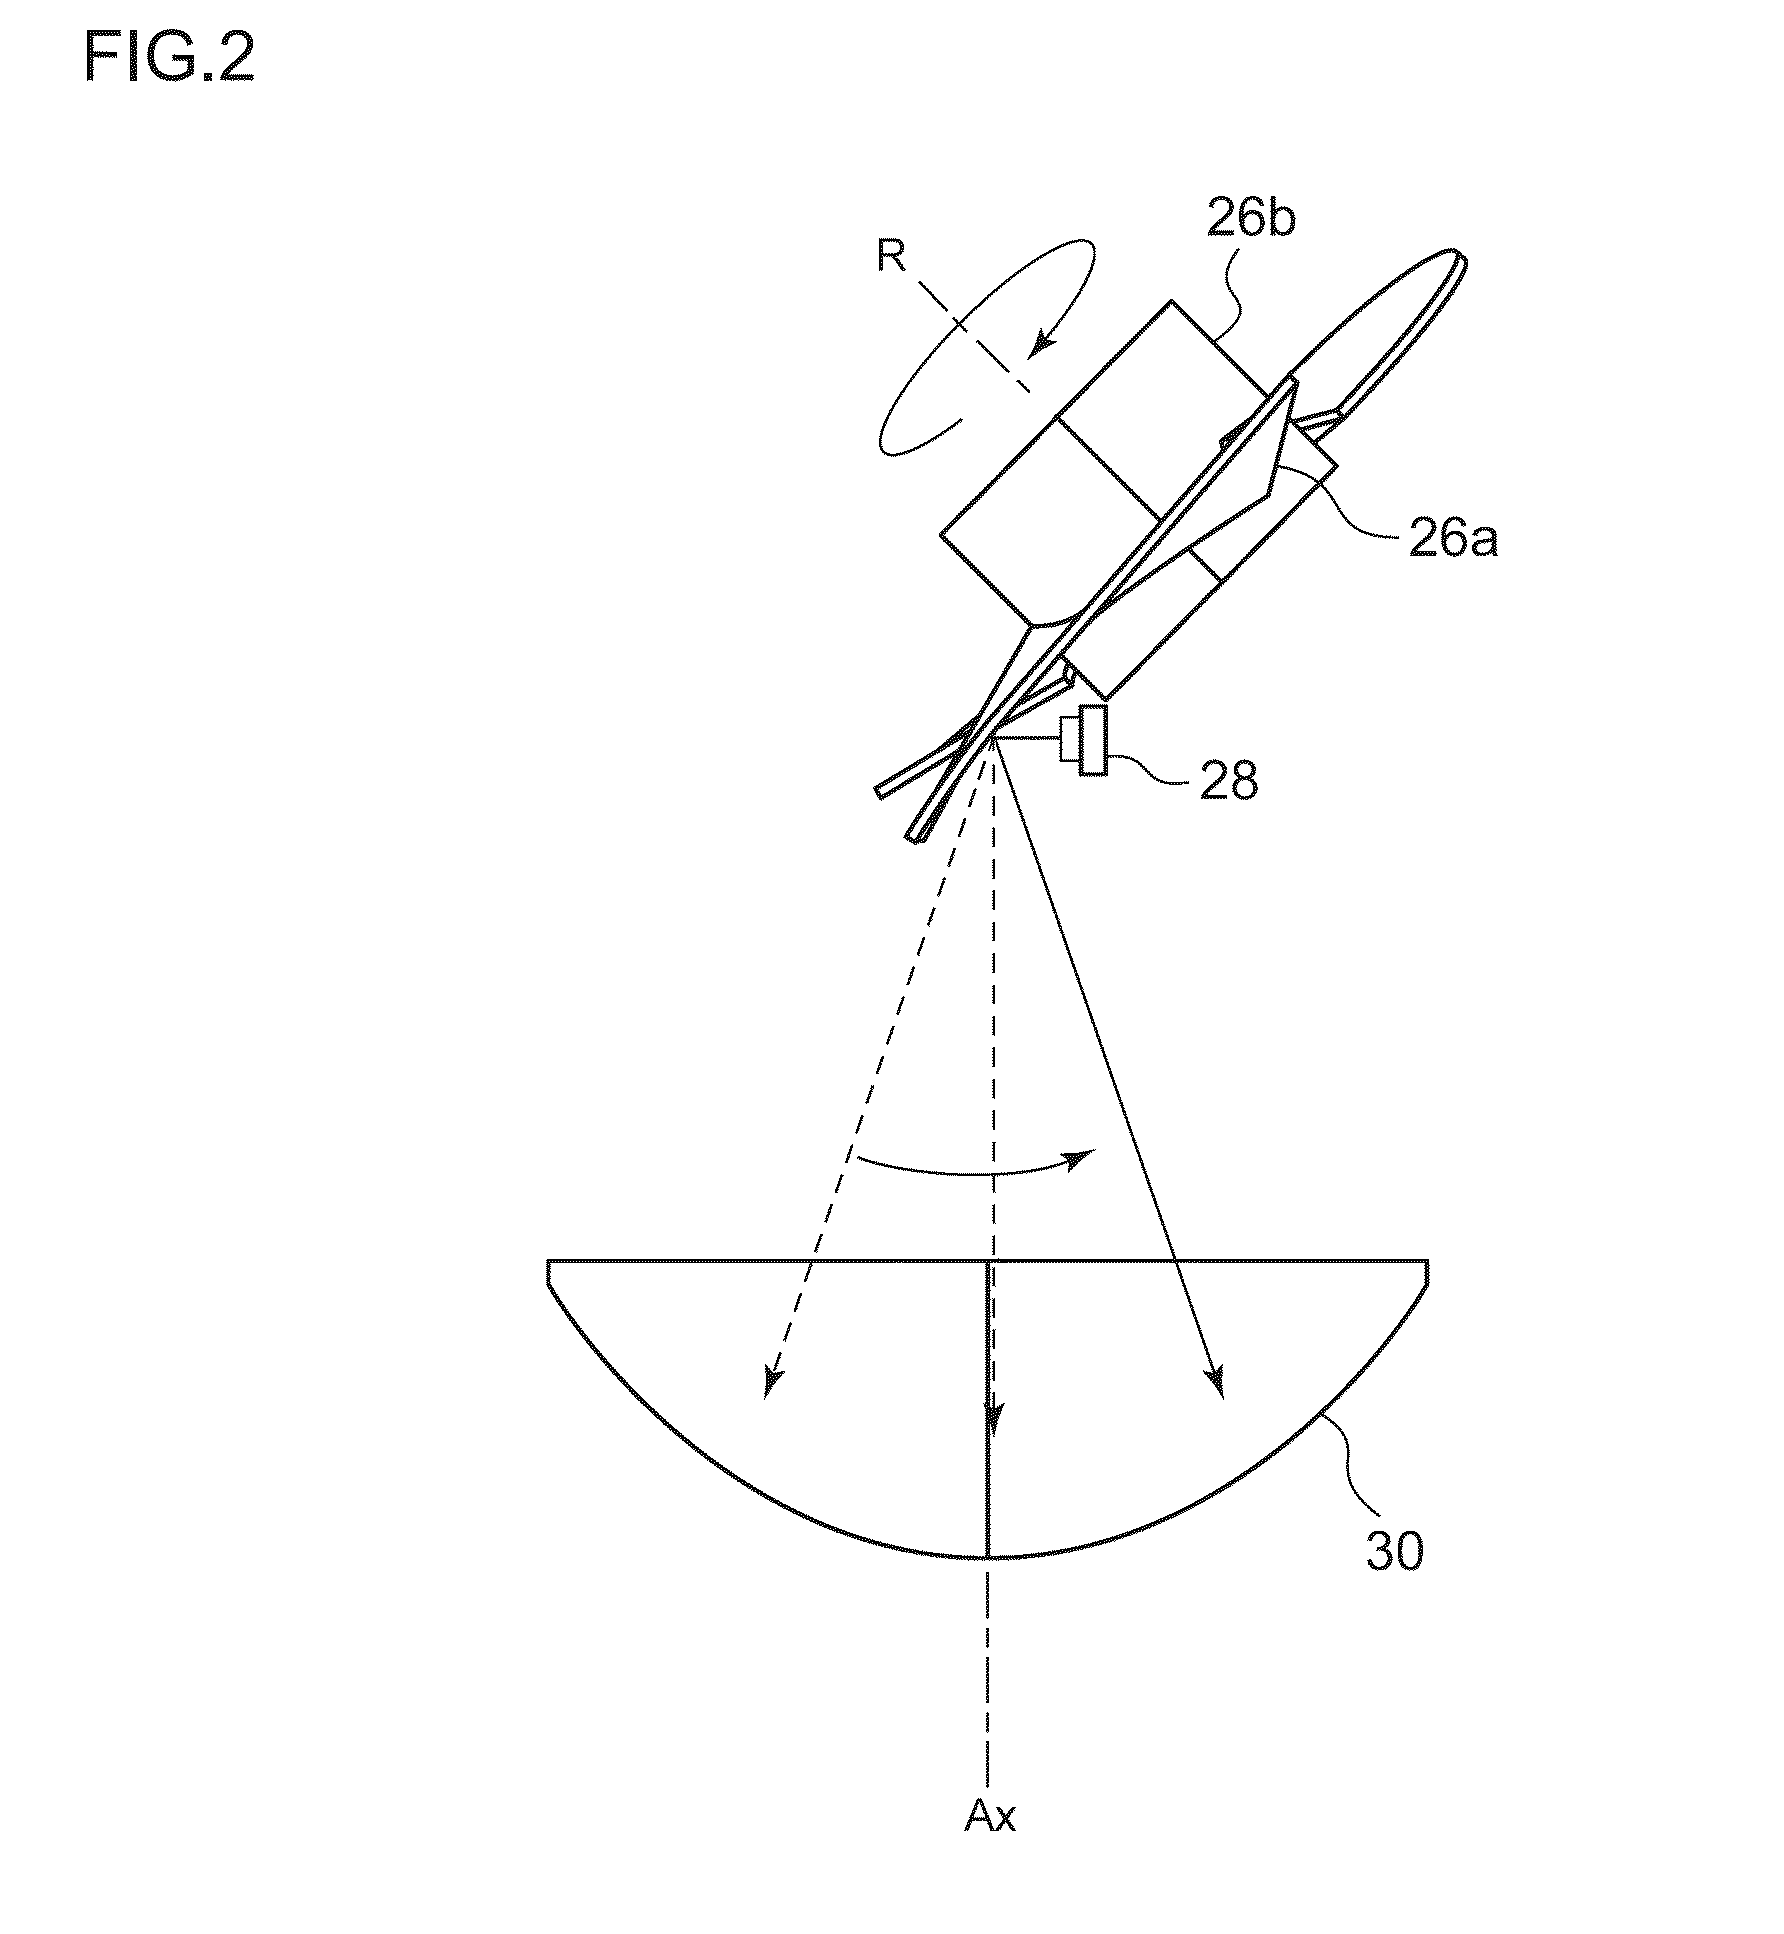 Optical unit, vehicle monitor, and obstruction detector